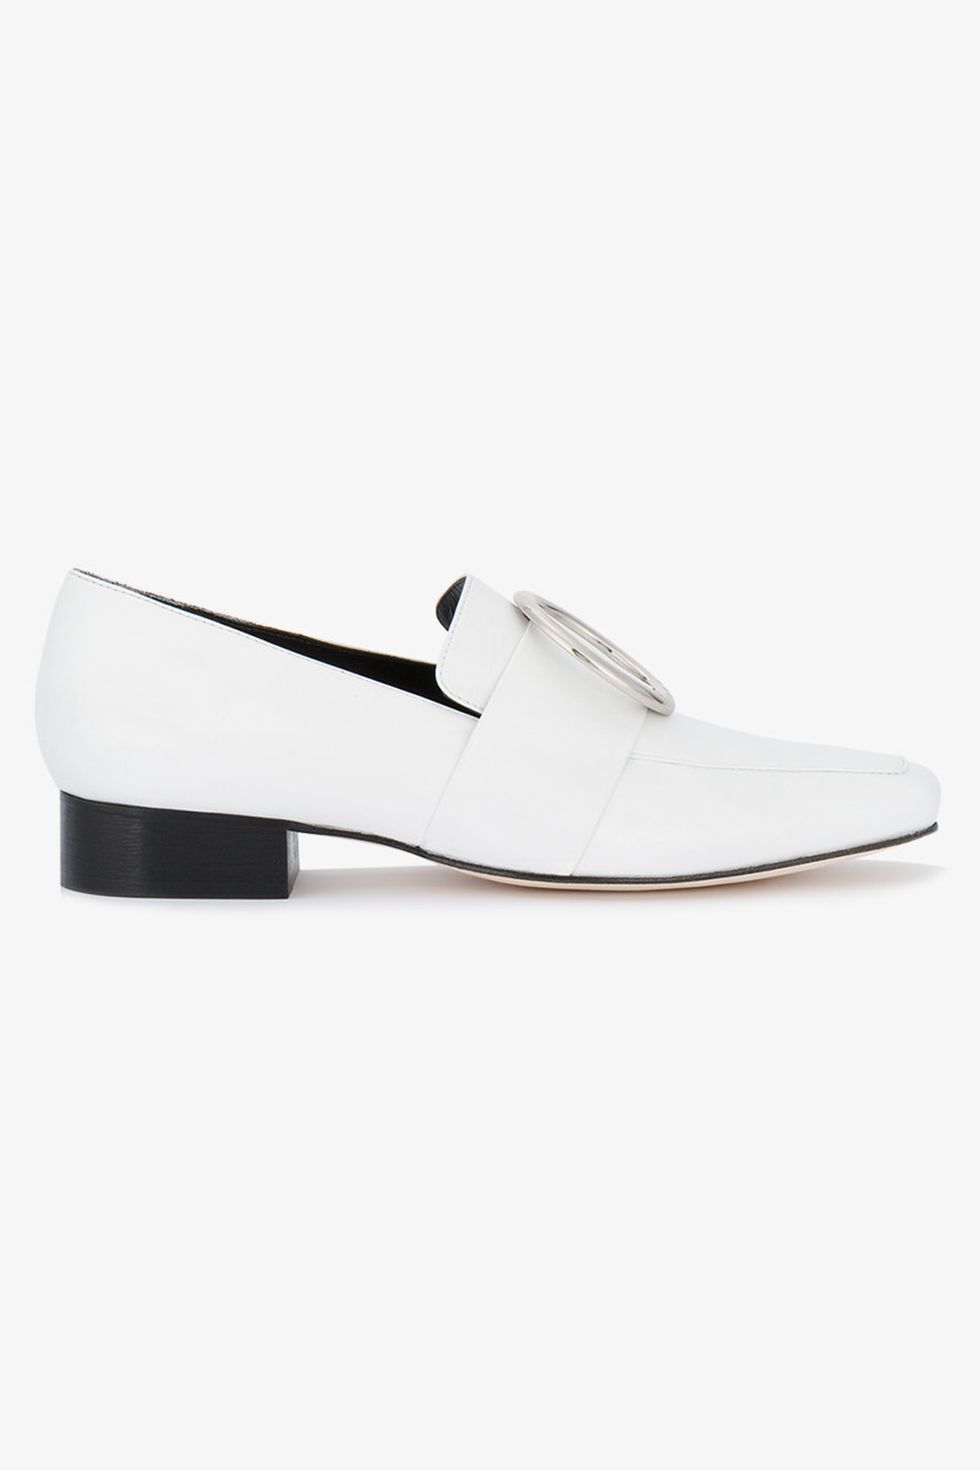 <p>Maak je outfit net wat futuristische met een paar witte instappers.</p><p><a href="https://www.brownsfashion.com/nl/shopping/white-leather-harput-loafers-12196885" target="_blank" data-tracking-id="recirc-text-link">Brownsfashion.com</a><span class="redactor-invisible-space" data-verified="redactor" data-redactor-tag="span" data-redactor-class="redactor-invisible-space"></span>, € 375,-</p>